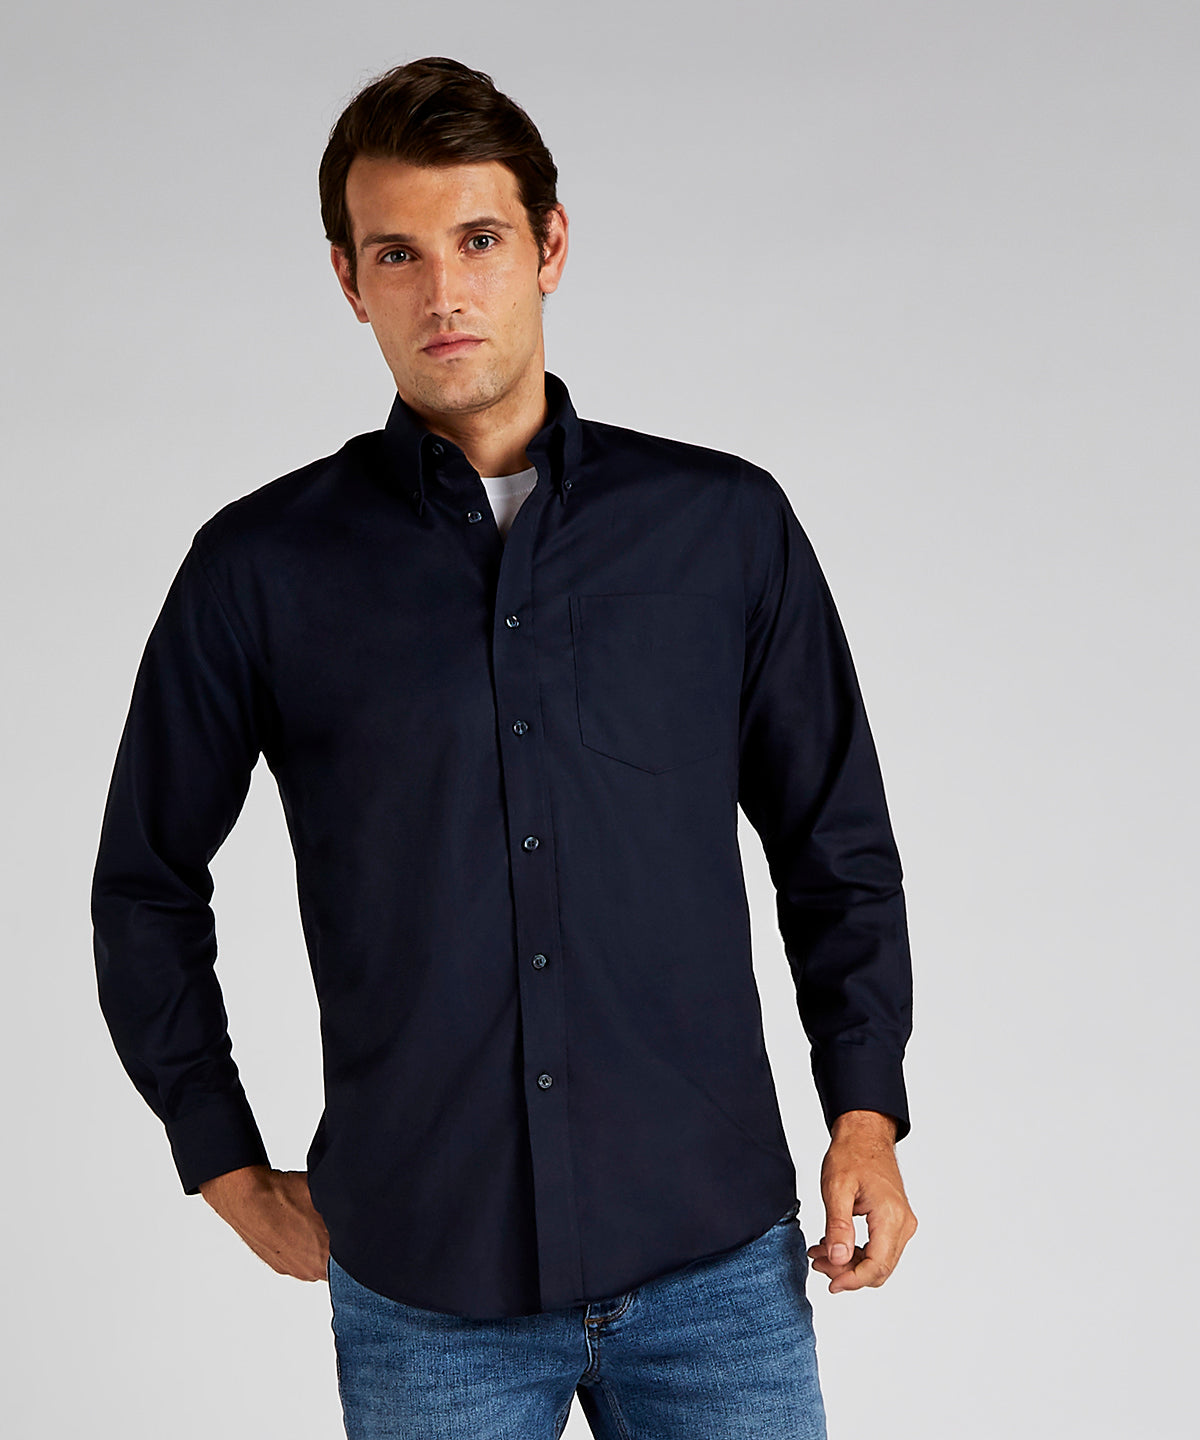 Bolir - Workplace Oxford Shirt Long-sleeved (classic Fit)